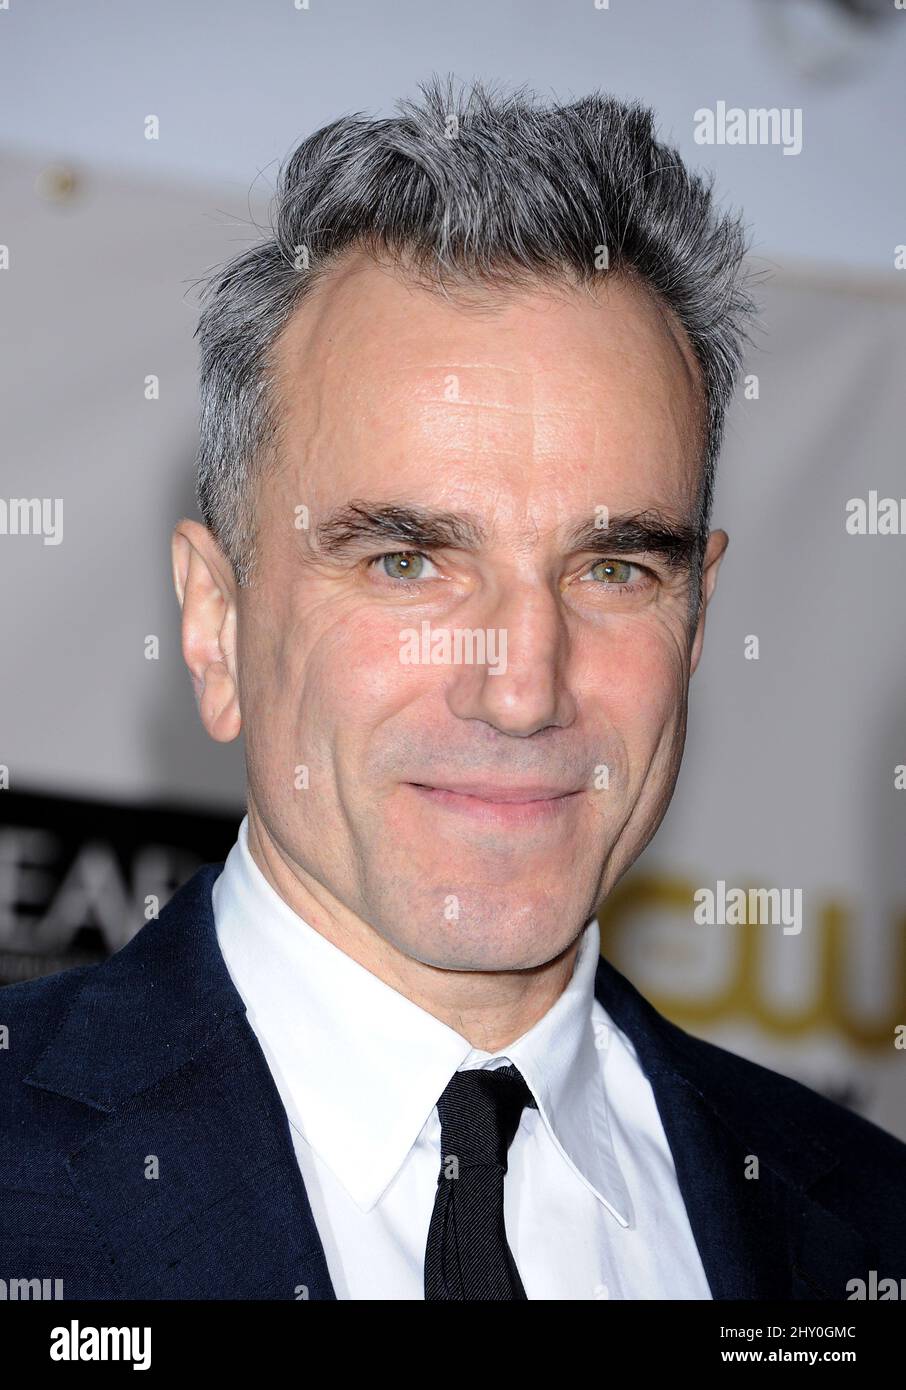 Daniel Day-Lewis poses backstage with the award for best actor for 'Lincoln' at the 18th Annual Critics' Choice Movie Awards at the Barker Hangar, in Santa Monica, California. Stock Photo